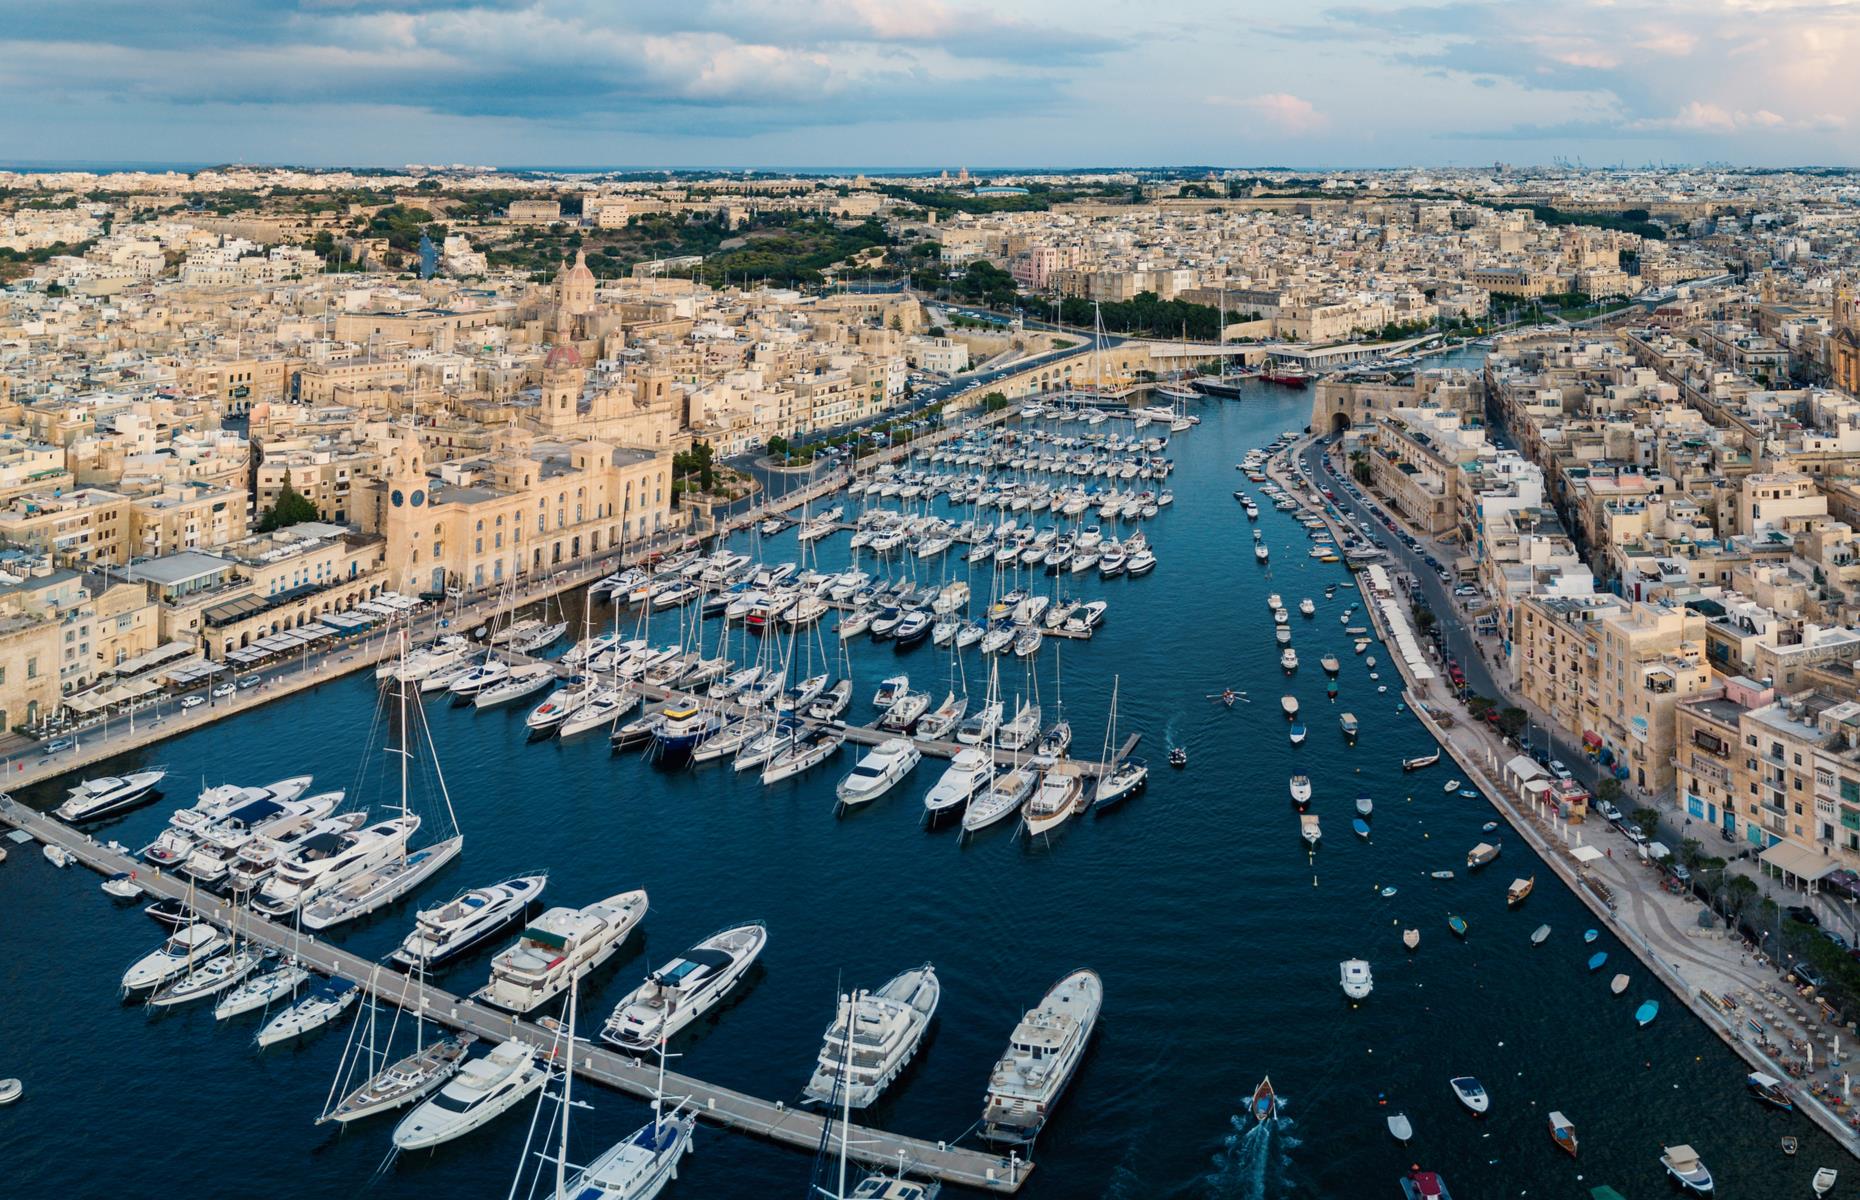 <p>Filled with a dazzling array of luxury yachts, Valletta’s Grand Harbour is the hub of this historic city. The port has been used for trade since Roman times, although nowadays it’s focused on cruise ships as opposed to cargo. Take a look at <a href="https://www.loveexploring.com/news/73530/valletta-itinerary-things-to-do">our city guide to Valletta</a>. </p>